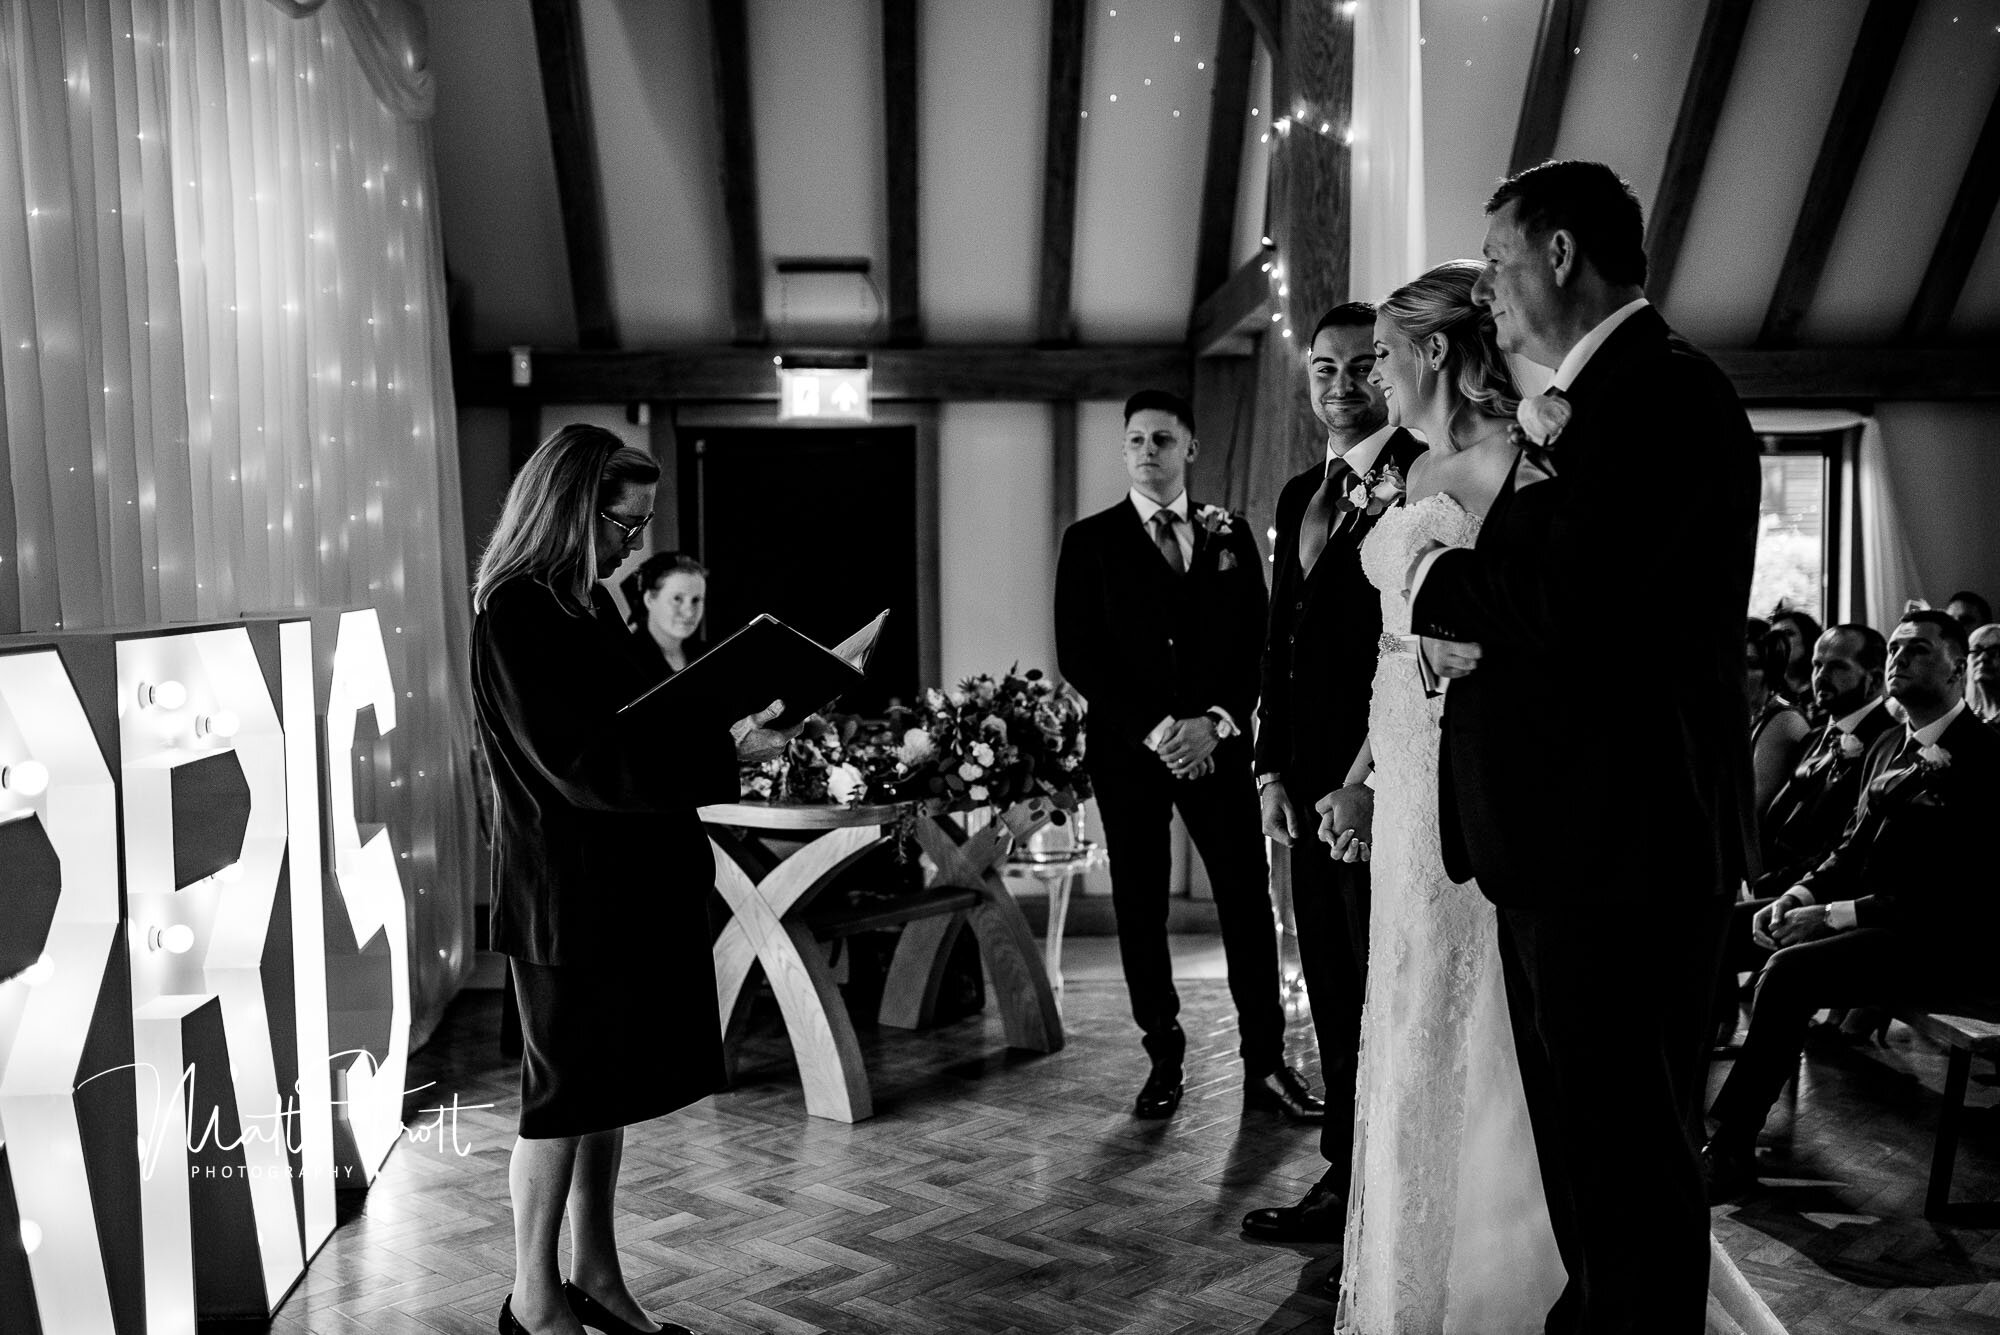 Ceremony at the old kent barn